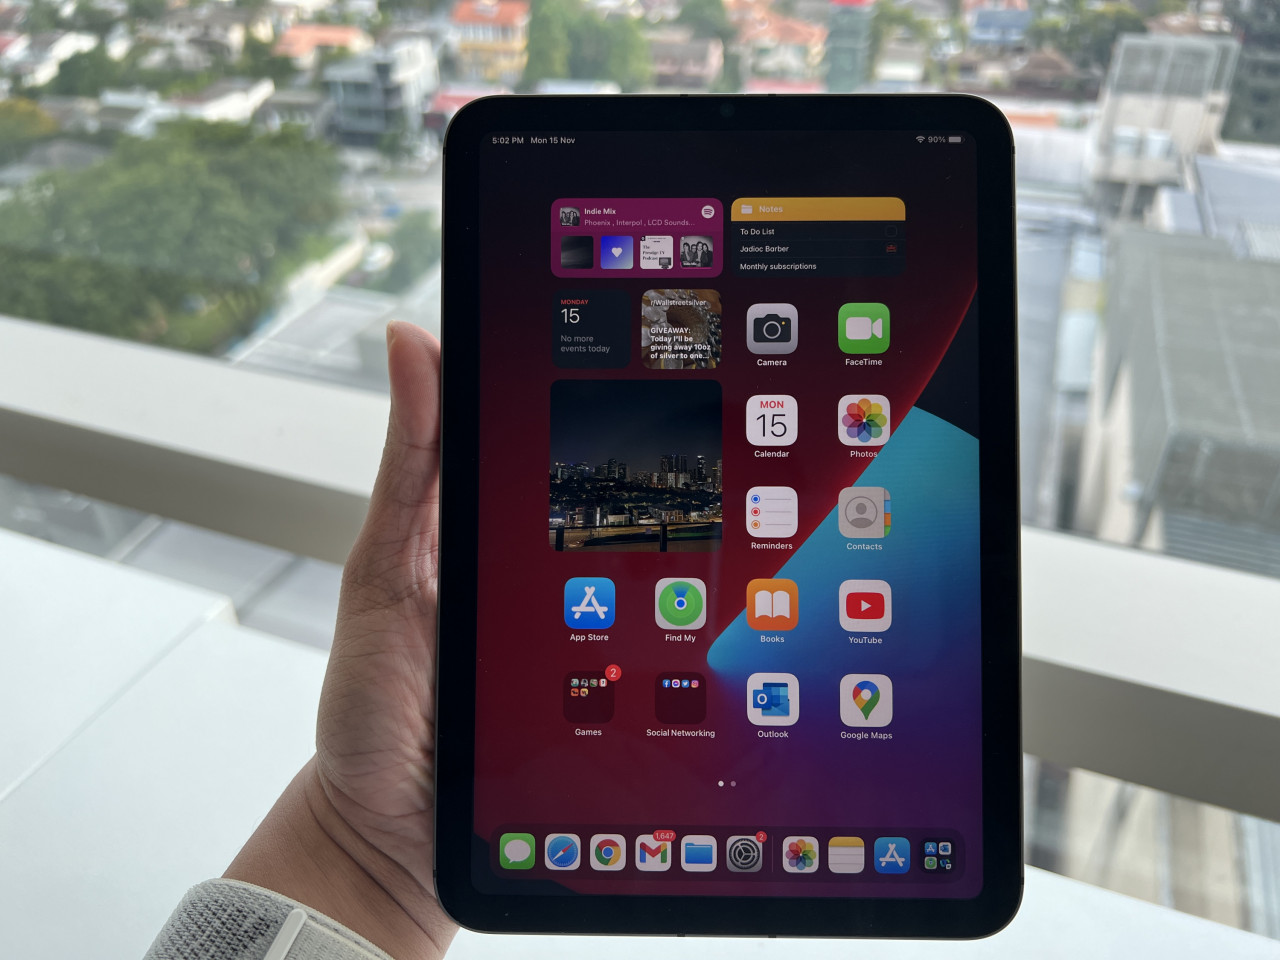 The iPad mini easily fits in the hand. Despite its small size, it’s still too big to use single-handedly. – Haikal Fernandez pic